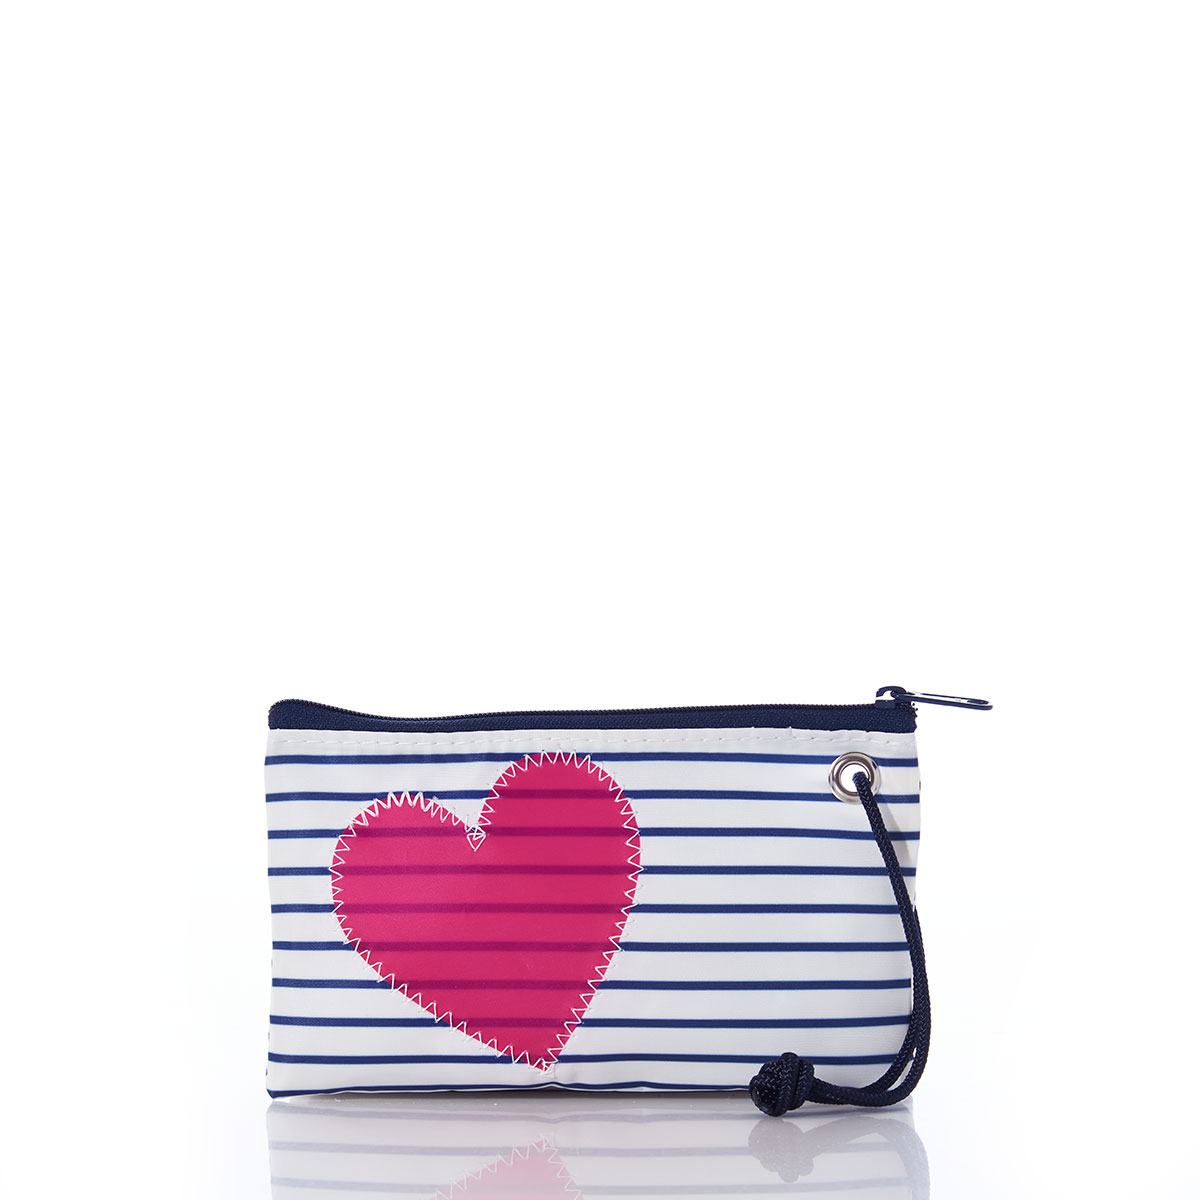 fuchsia heart applique on navy and white striped recycled sail cloth wristlet with navy zipper and wristlet strap